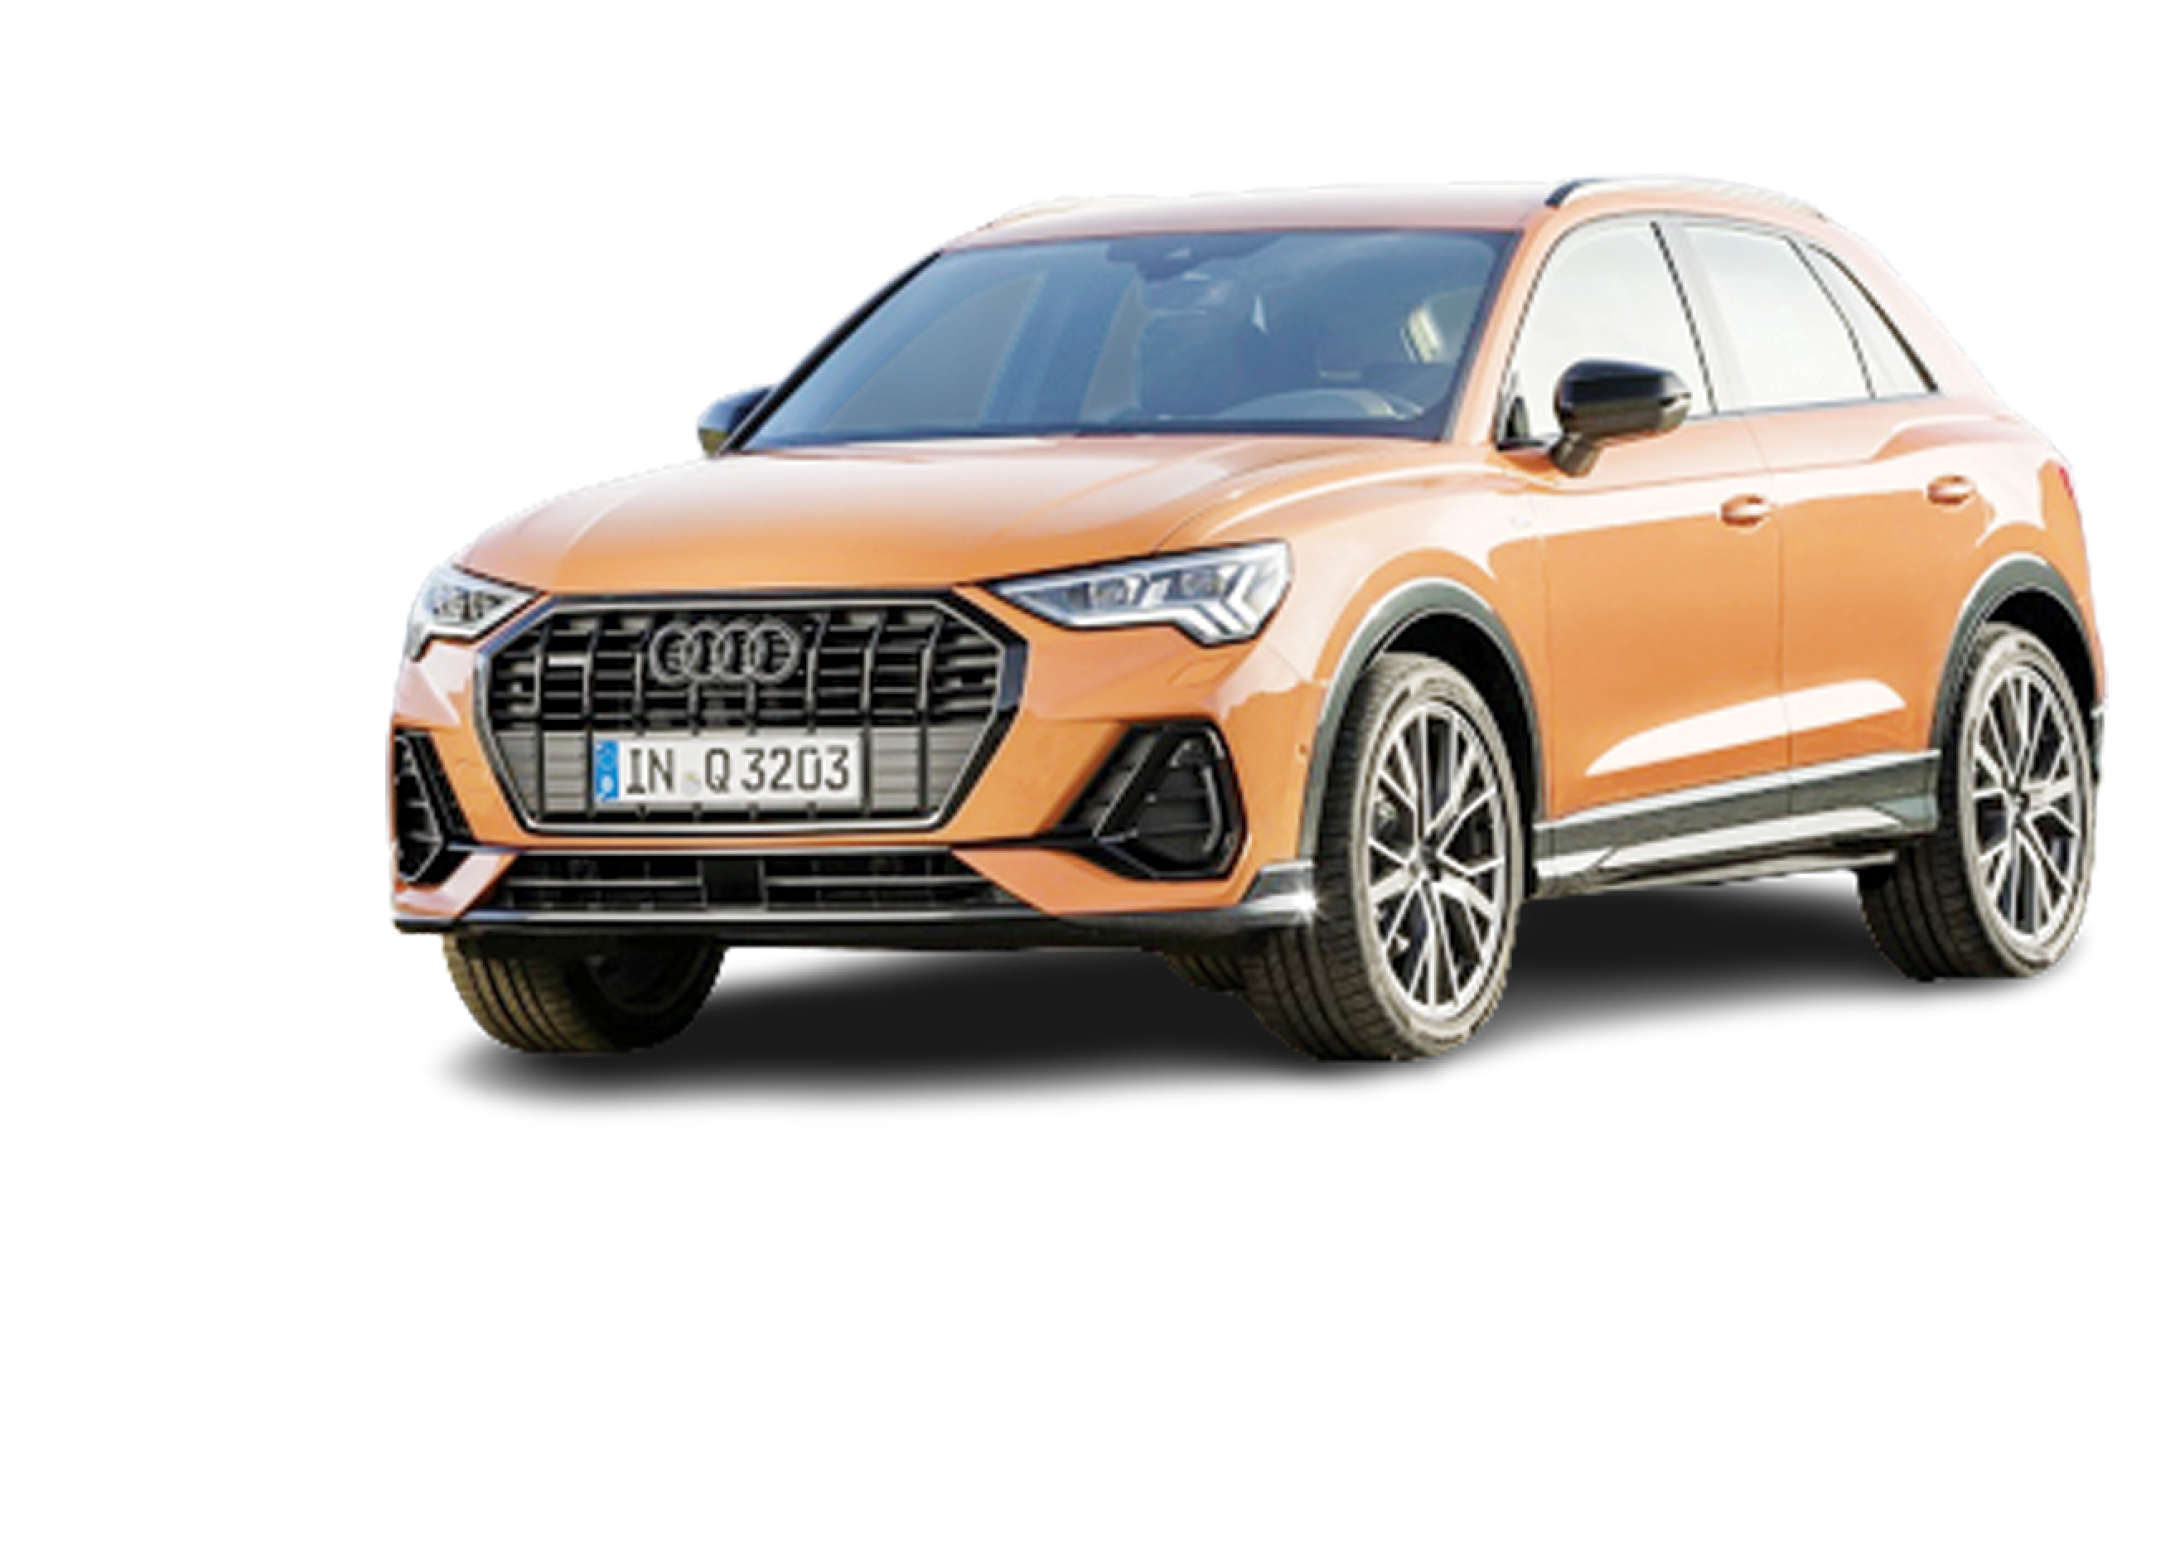 The Q3 has been one of the most popular cars for German luxury brand Audi in India.